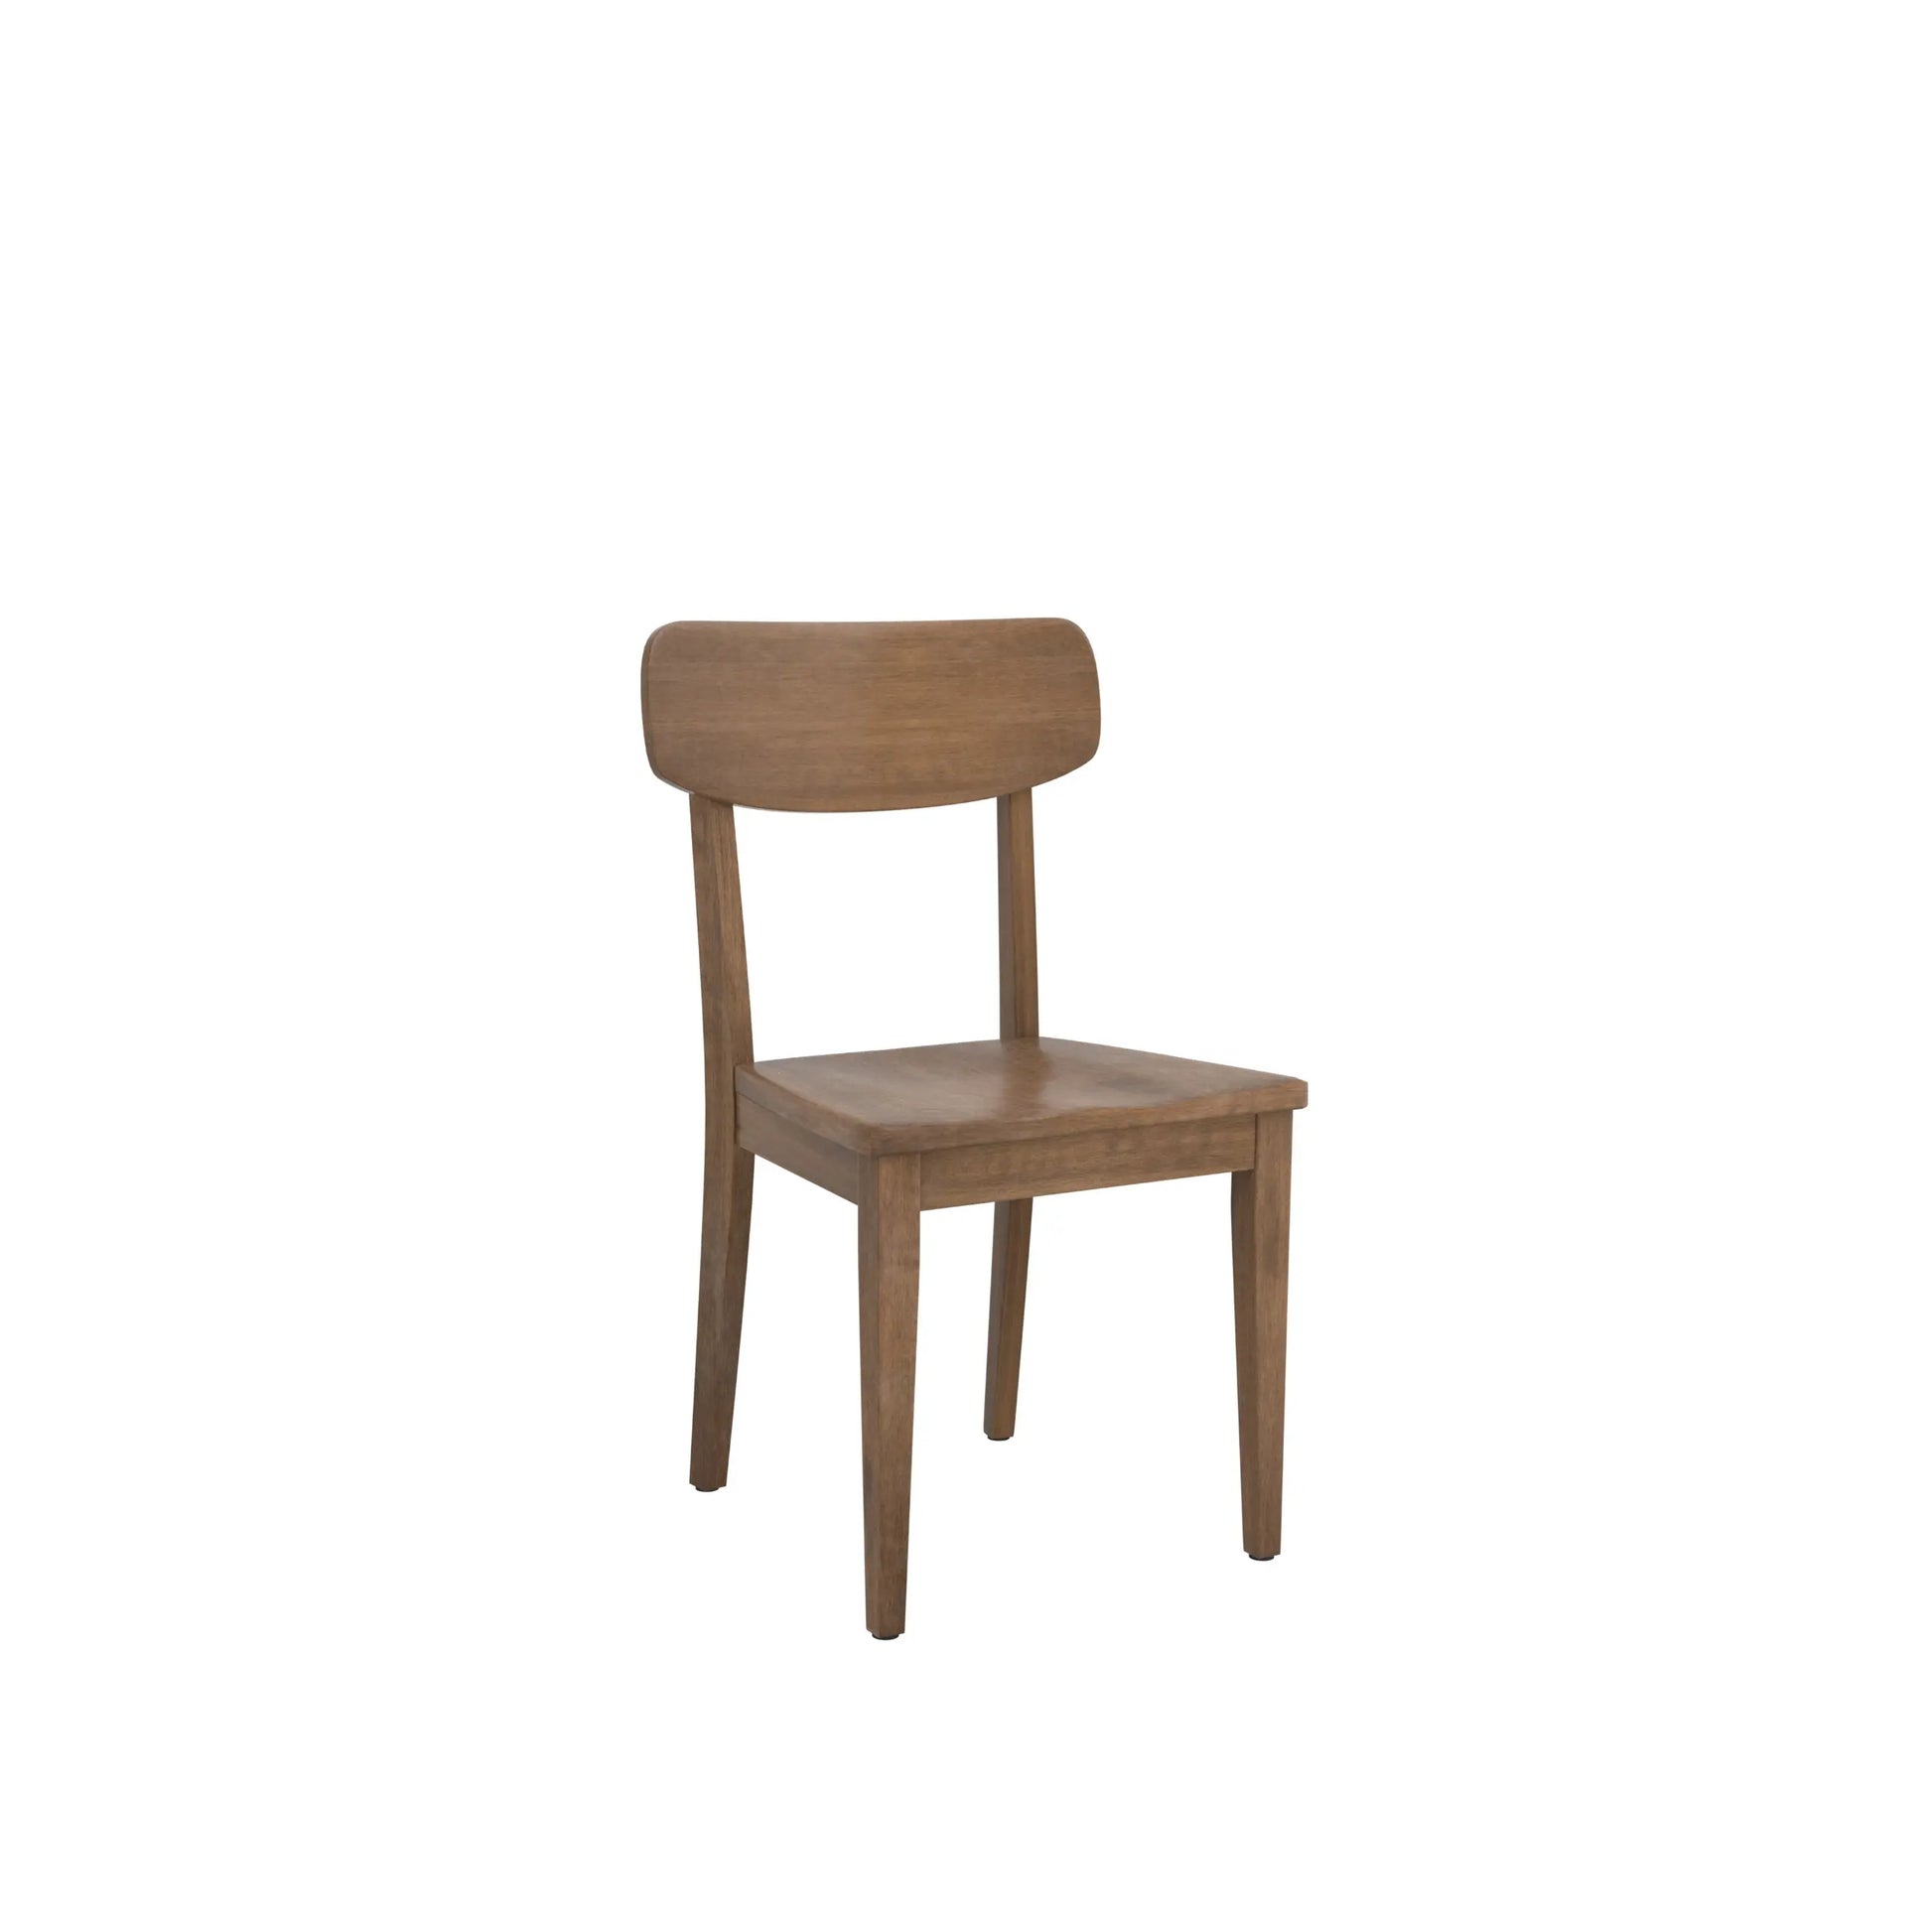 The Shelby - Modern Dining Chair Moderncre8ve